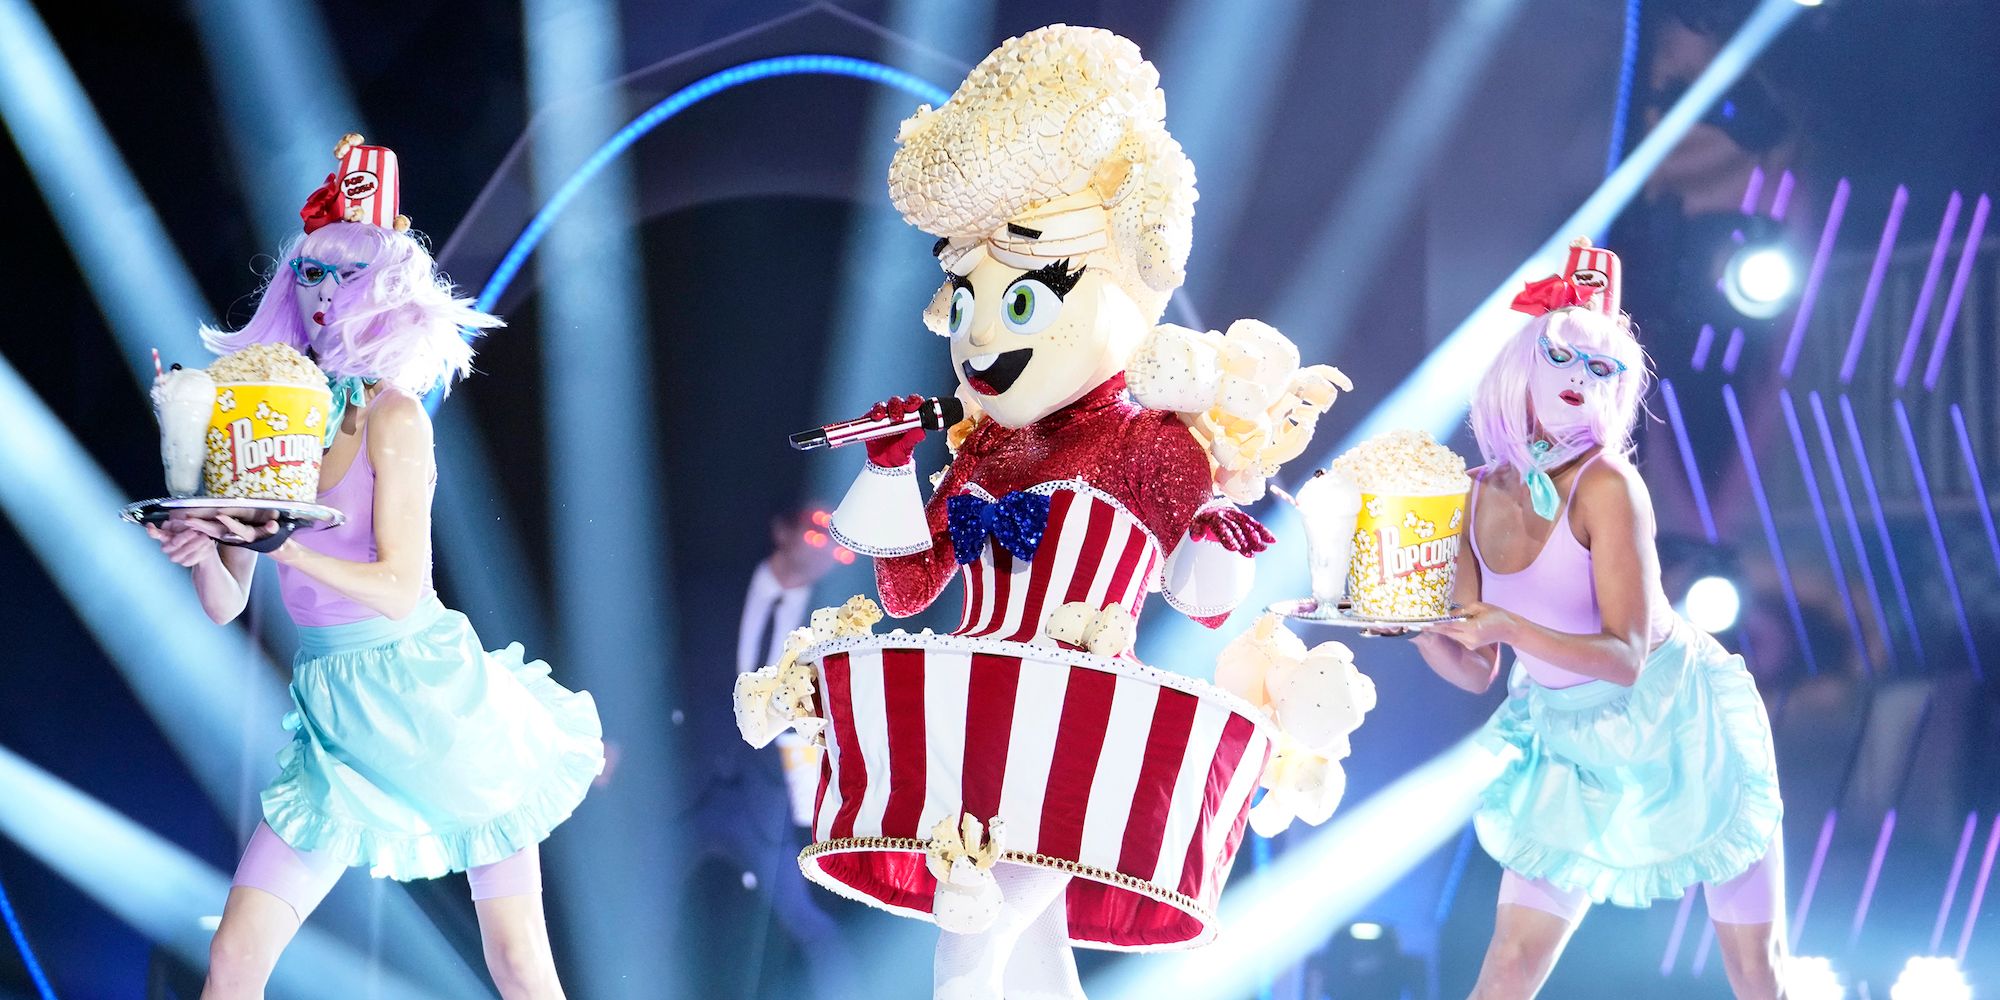 The Popcorn performing on The Masked Singer stage